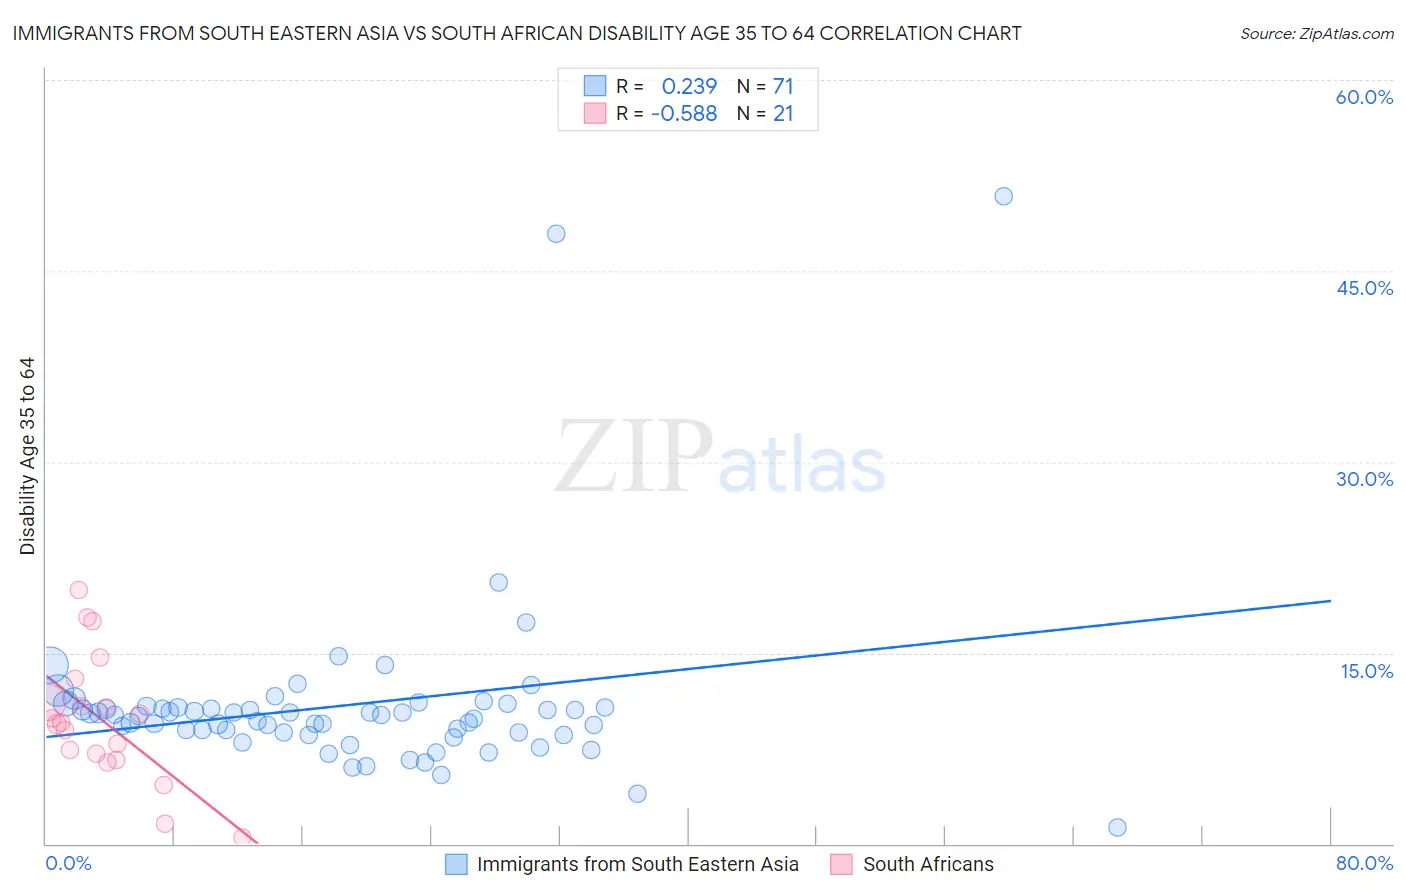 Immigrants from South Eastern Asia vs South African Disability Age 35 to 64